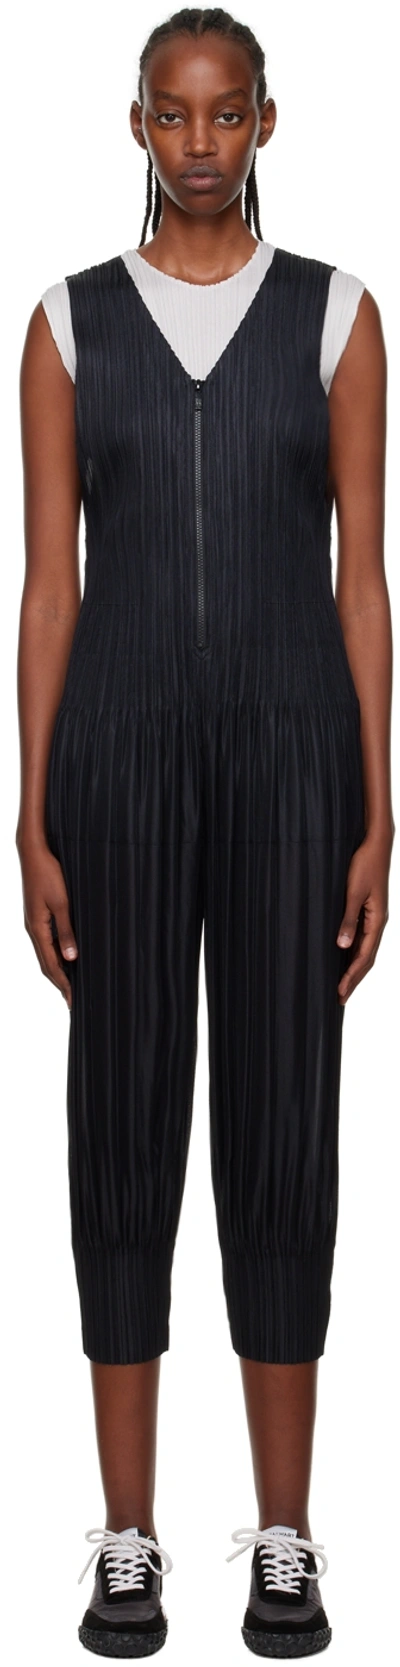 Women's ISSEY MIYAKE Jumpsuits Sale, Up To 70% Off | ModeSens